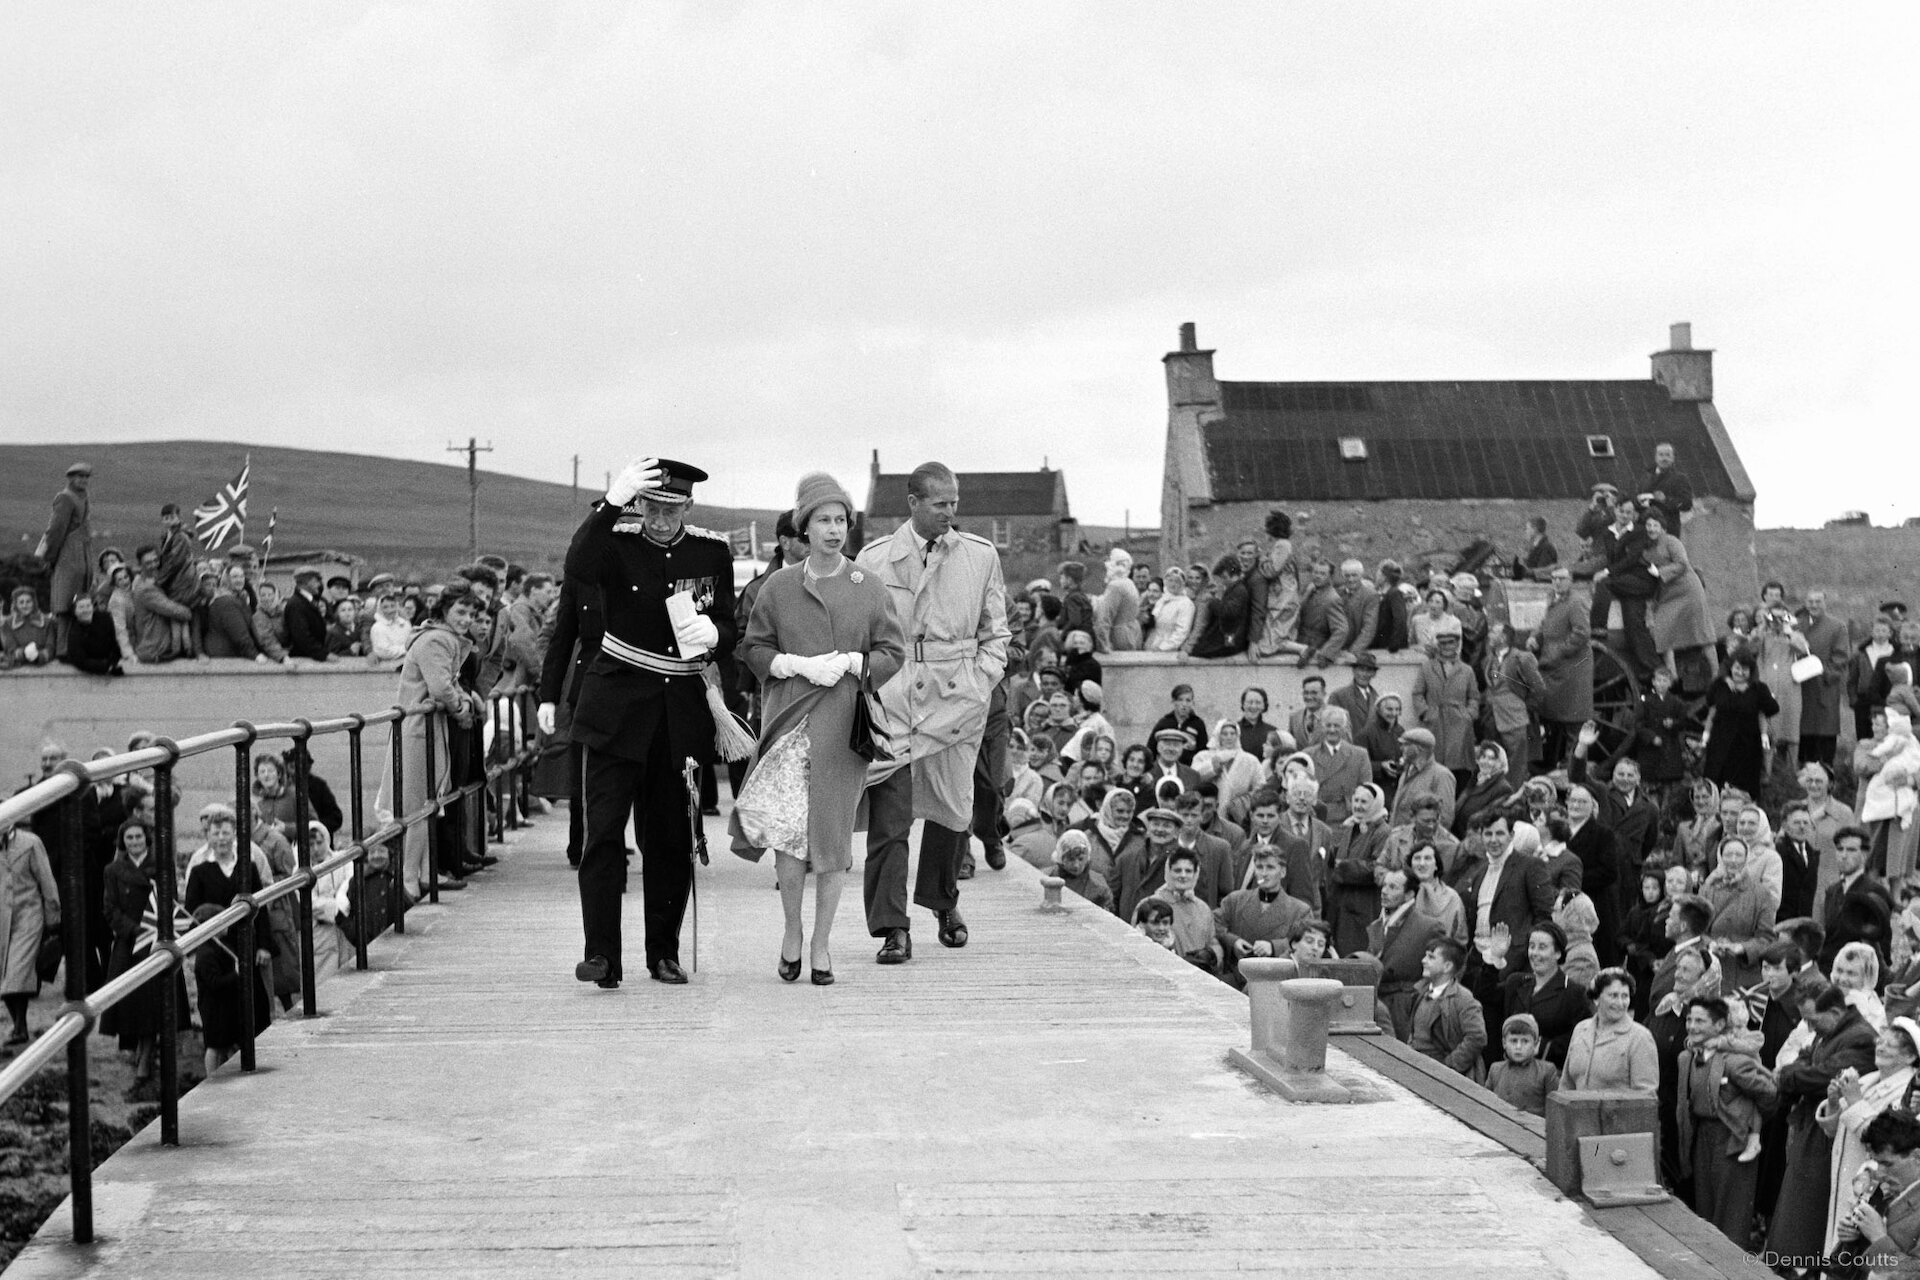 Queen Elizabeth II and Prince Phillip at Toft Pier during their 1960 visit. Photo: Dennis Coutts.